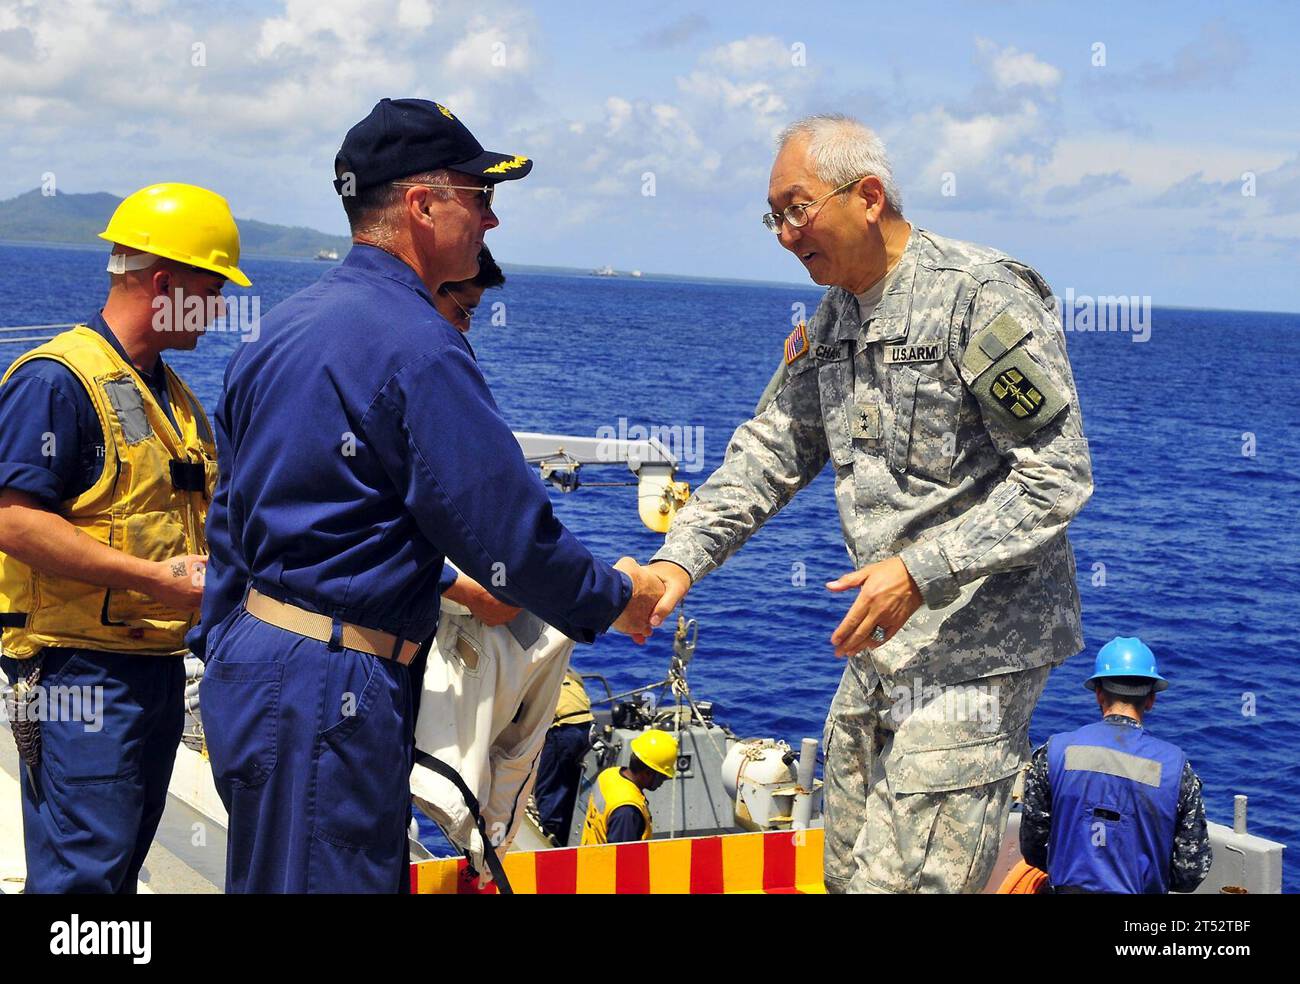 110707KB563-041 POHNPEI, Federated States of Micronesia (July 7, 2011) Capt. S. Robert Roth, left, commanding officer of the amphibious transport dock ship USS Cleveland (LPD 7), welcomes aboard Army Reserve Maj. Gen. Lie-Ping Chang during Pacific Partnership 2011. Ping, commanding general with the 807th Medical Command, spoke to Soldiers serving aboard Cleveland and toured the ship. Pacific Partnership is a five-month humanitarian assistance initiative that will make port visits to Tonga, Vanuatu, Papua New Guinea, Timor Leste, and the Federated States of Micronesia. Navy Stock Photo